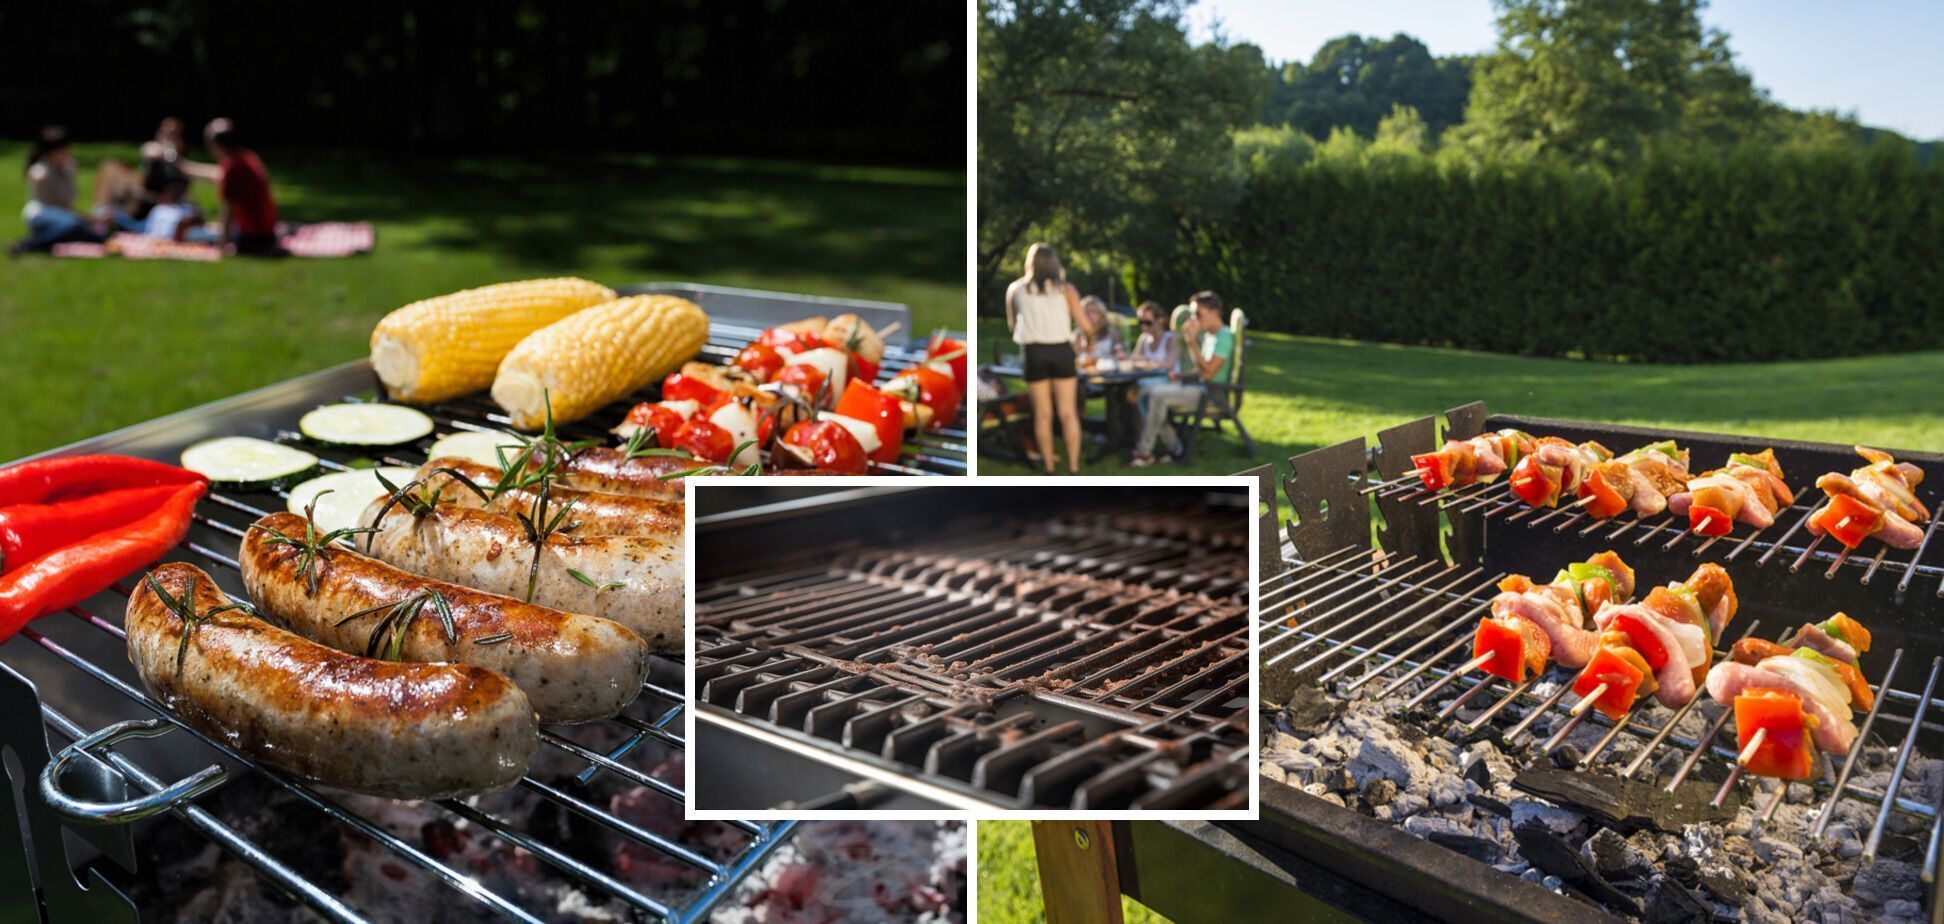 Why summer barbecues can be dangerous: rules for eating outdoors